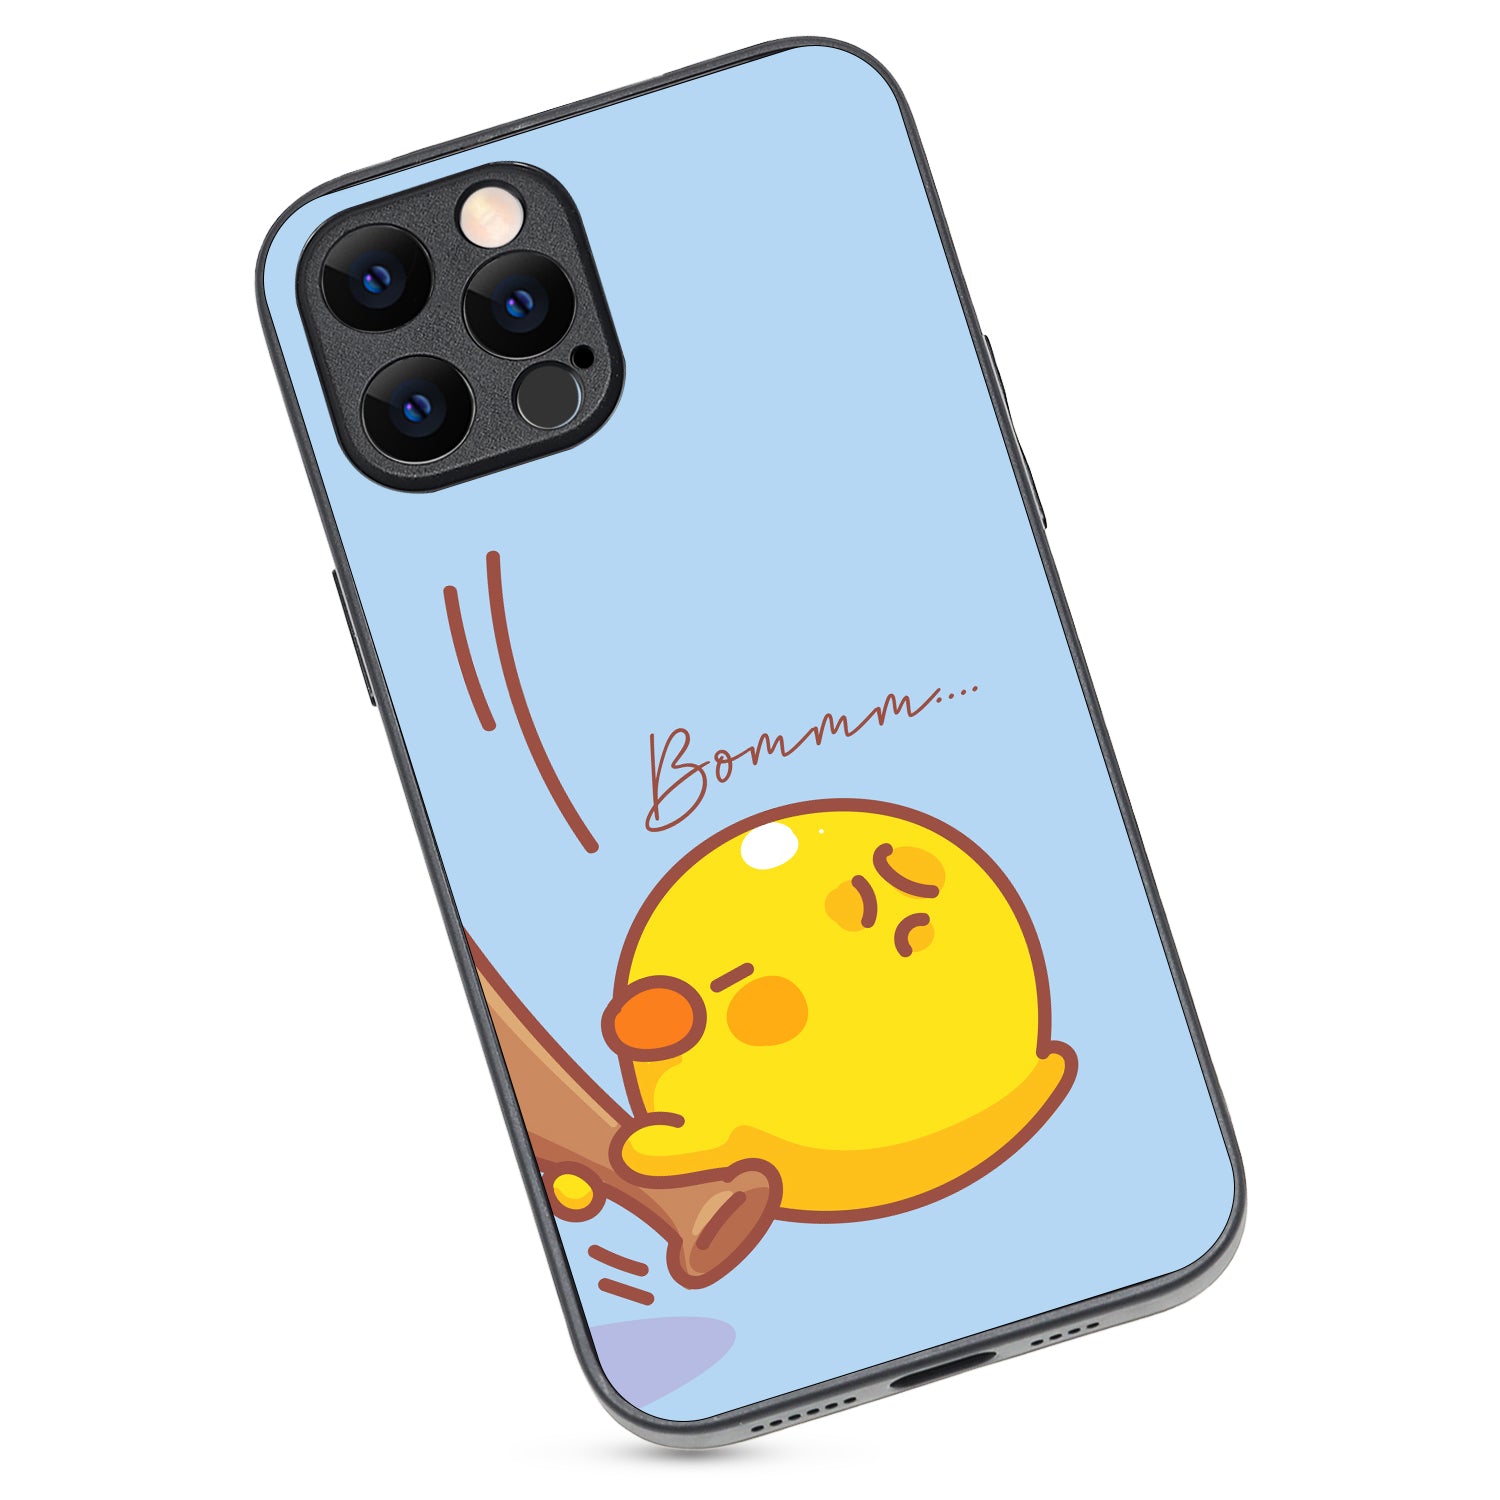 Bomm Cute Bff iPhone 12 Pro Max Case